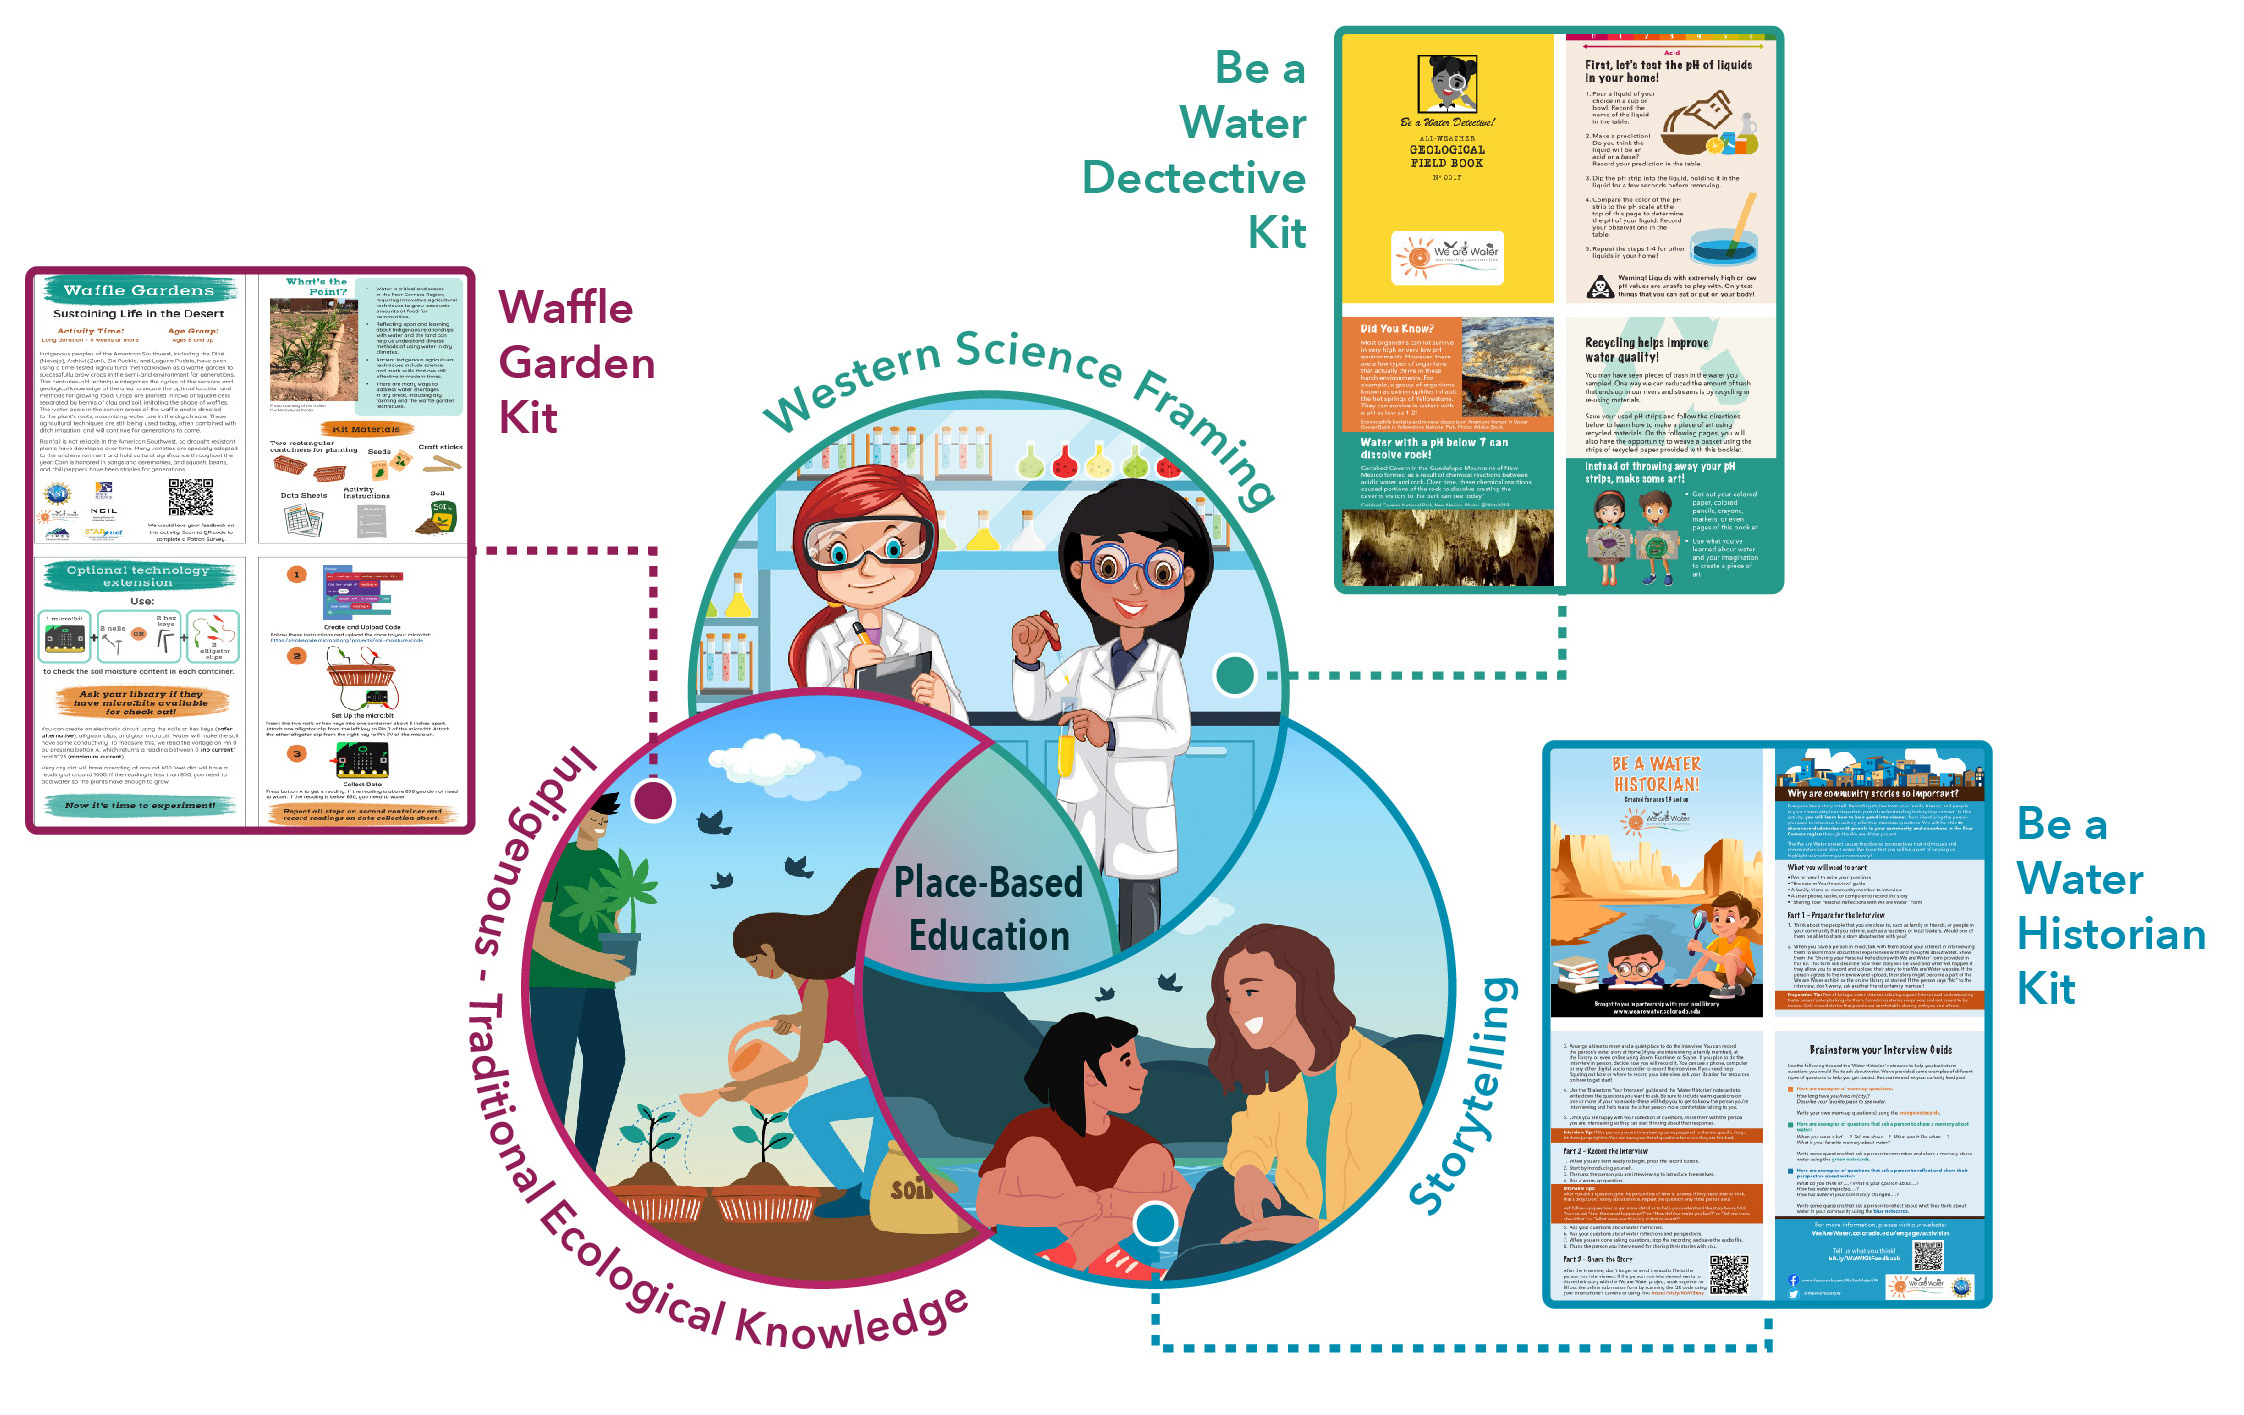 The graphic depicts the interweaving of Western science, Indigenous and traditional ecological knowledge (ITEK), and storytelling in We are Water place-based education programming. To connect learners with water topics, the Be a Water Detective kit uses Western science, the Waffle Garden kit uses ITEK, and the Be a Water Historian kit uses storytelling.